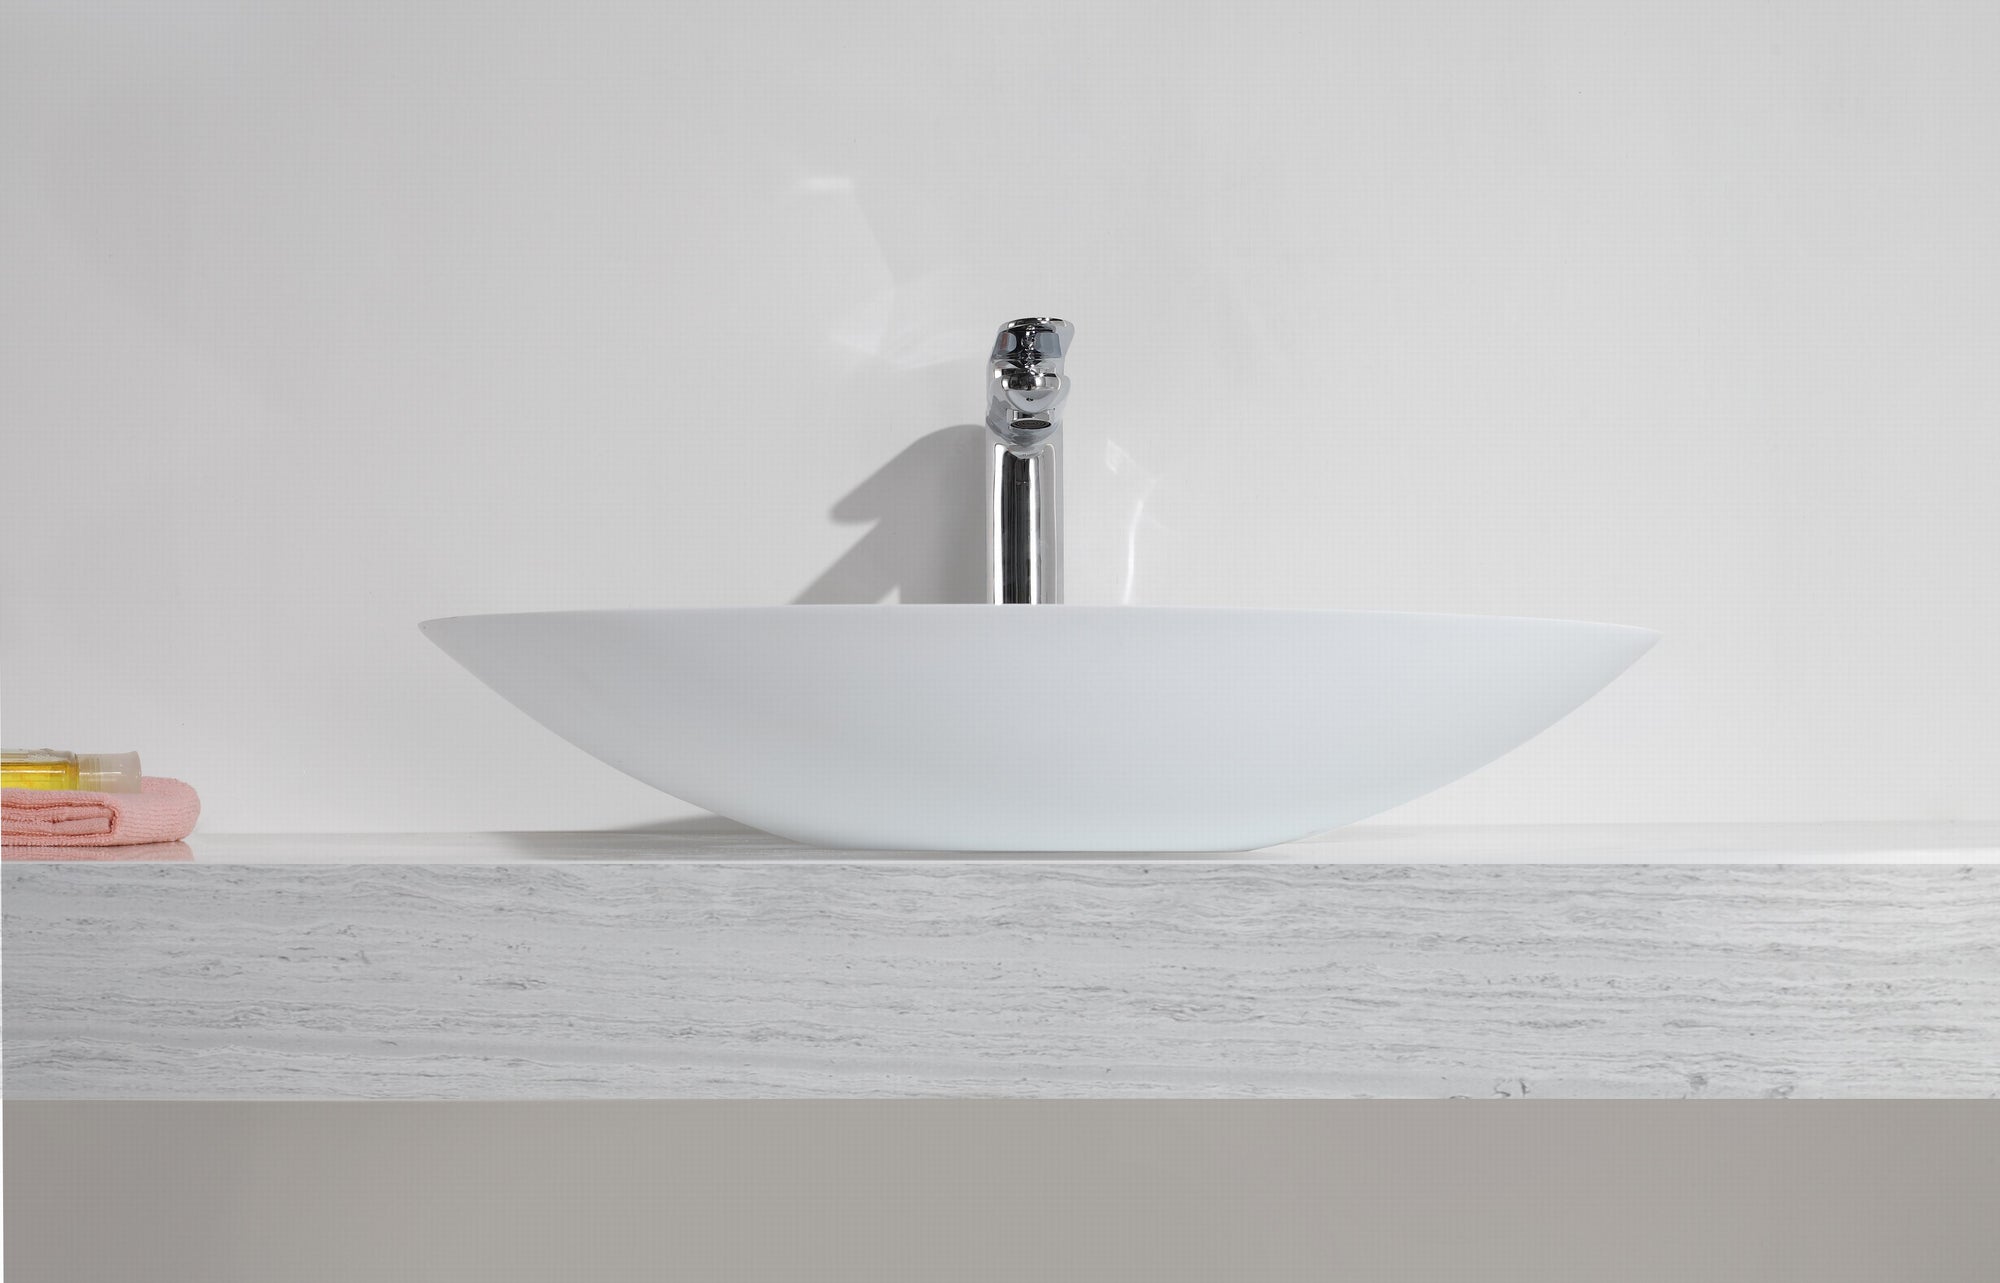 Solid Oval Shaped Basin - 590mm - B1301-A